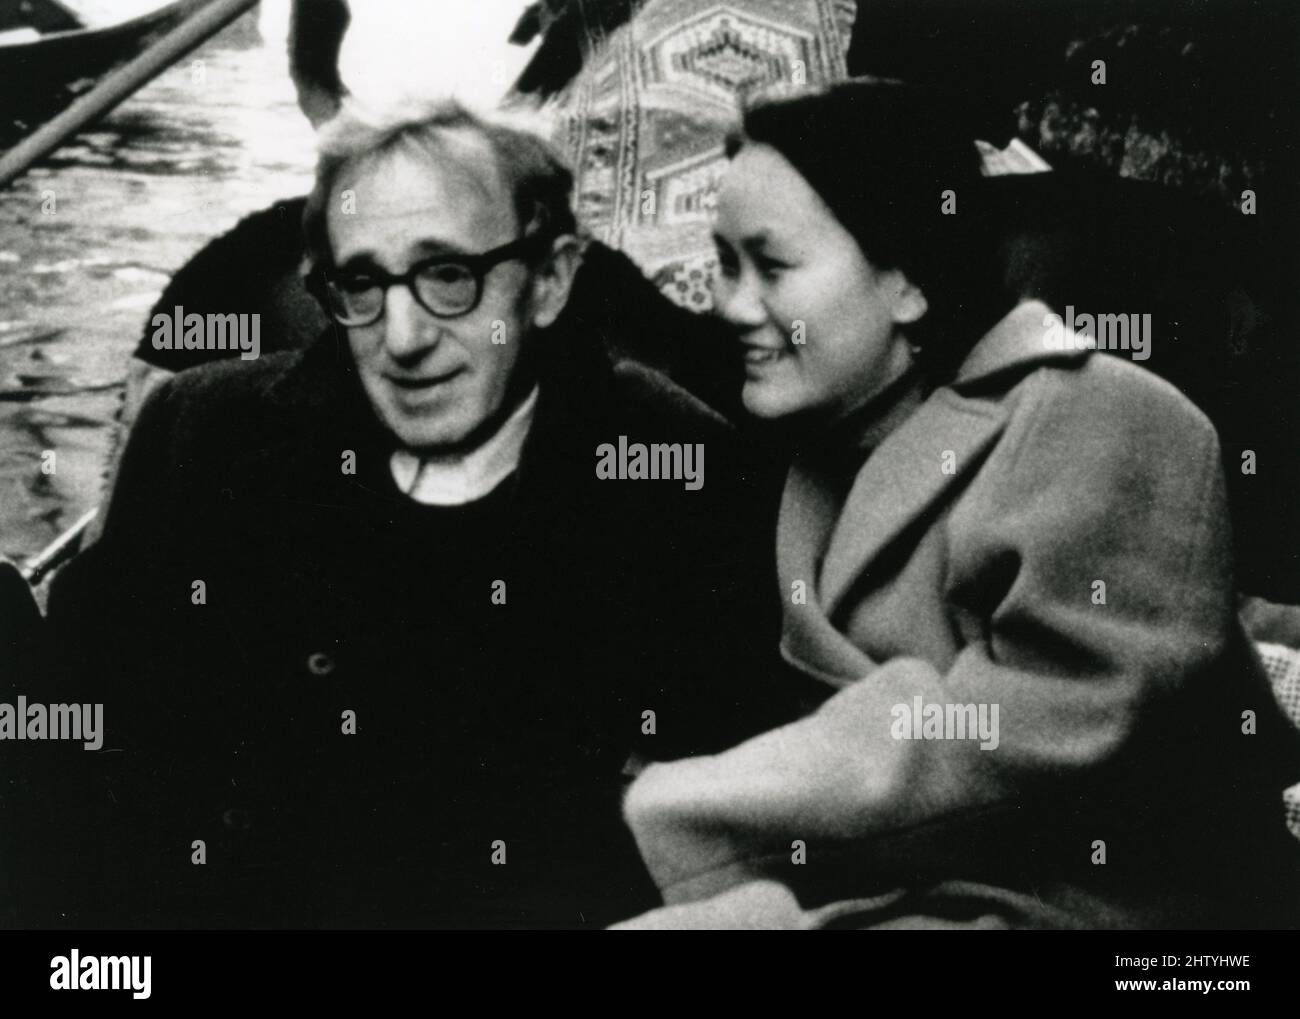 American actor and film director Woody Allen and actress Soon Yi Previn in the movie Wild Man Blues, USA 1998 Stock Photo